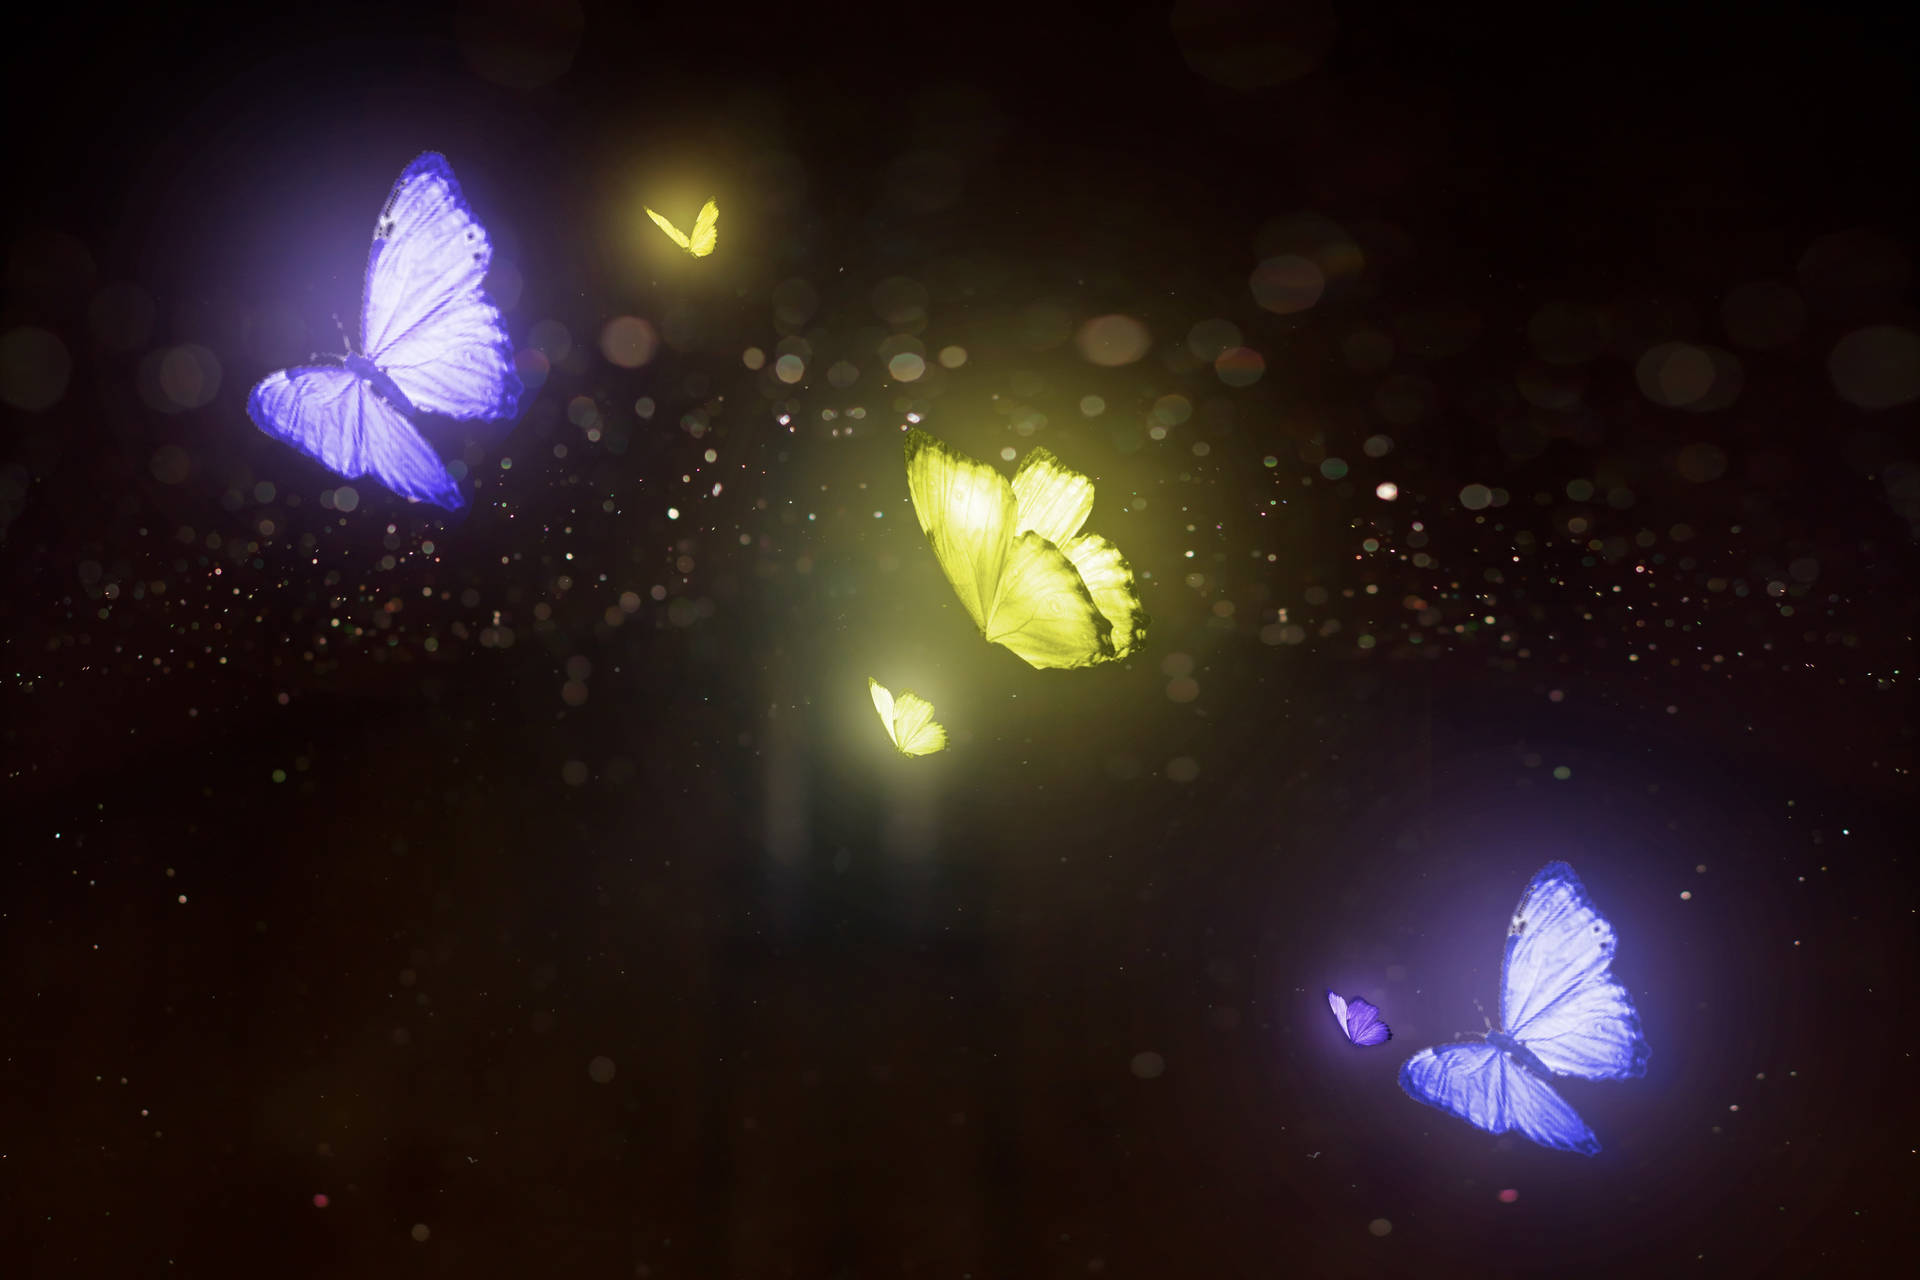 Top 999+ Night Butterfly Wallpaper Full HD, 4K Free to Use